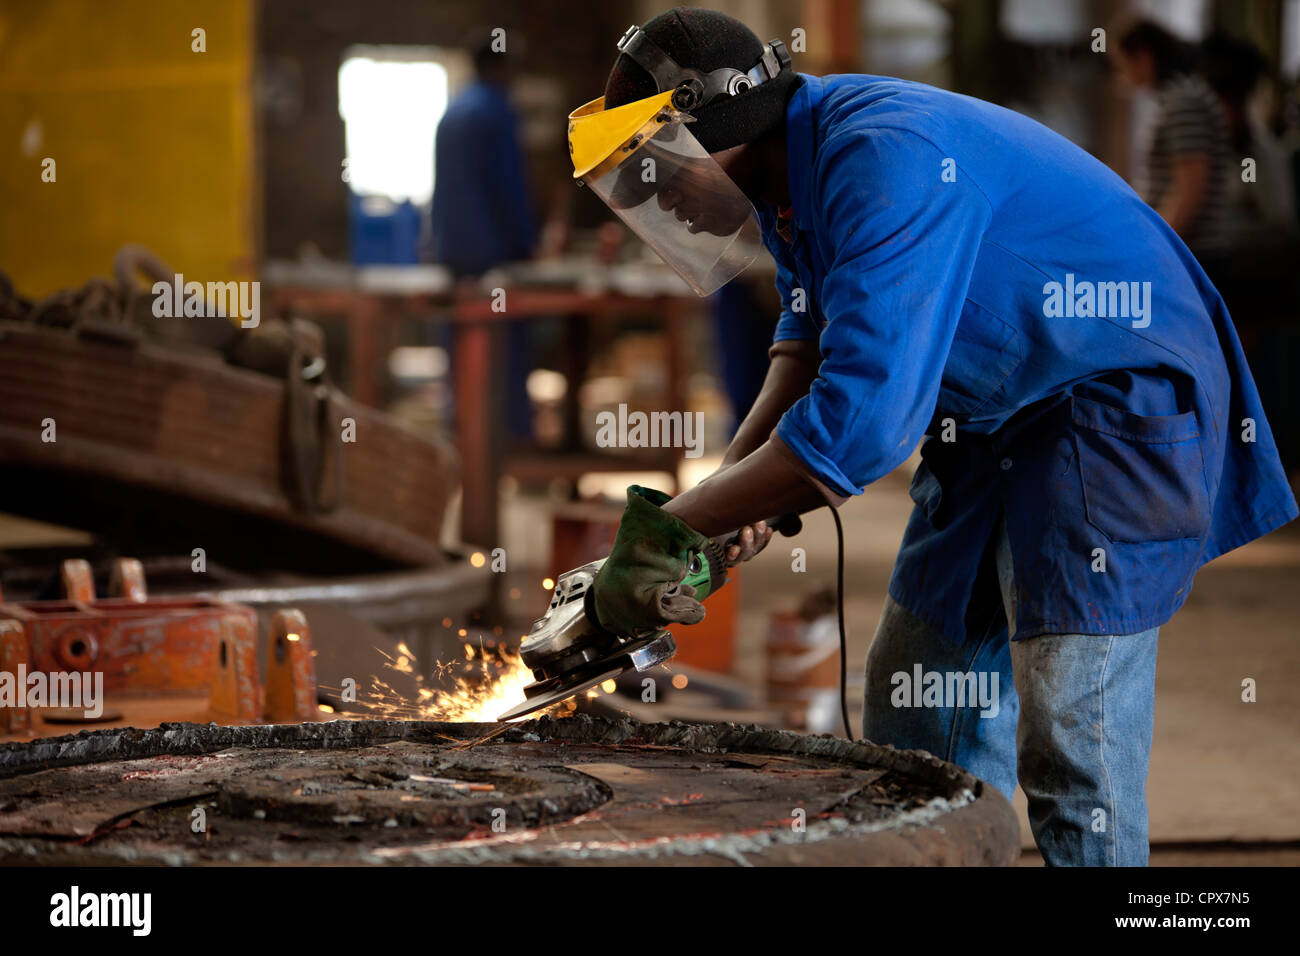 Grinding an industrial magnet in a magnet factory, Gauteng, South Africa Stock Photo